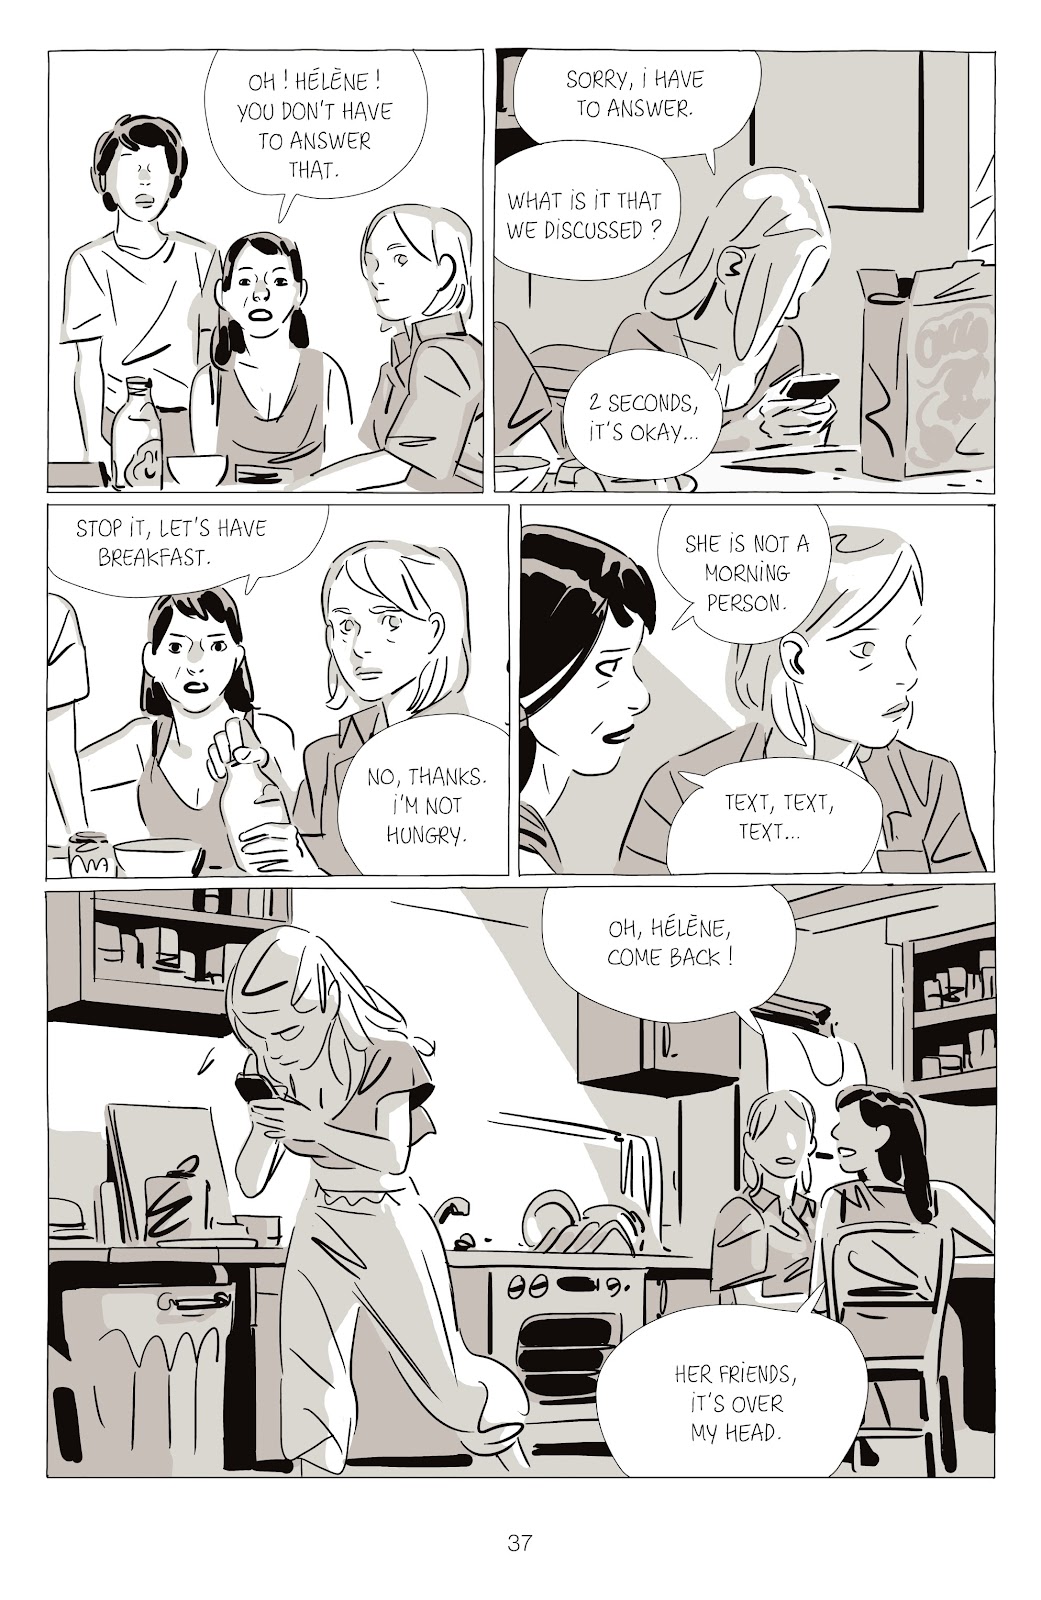 A Sister graphic novel review